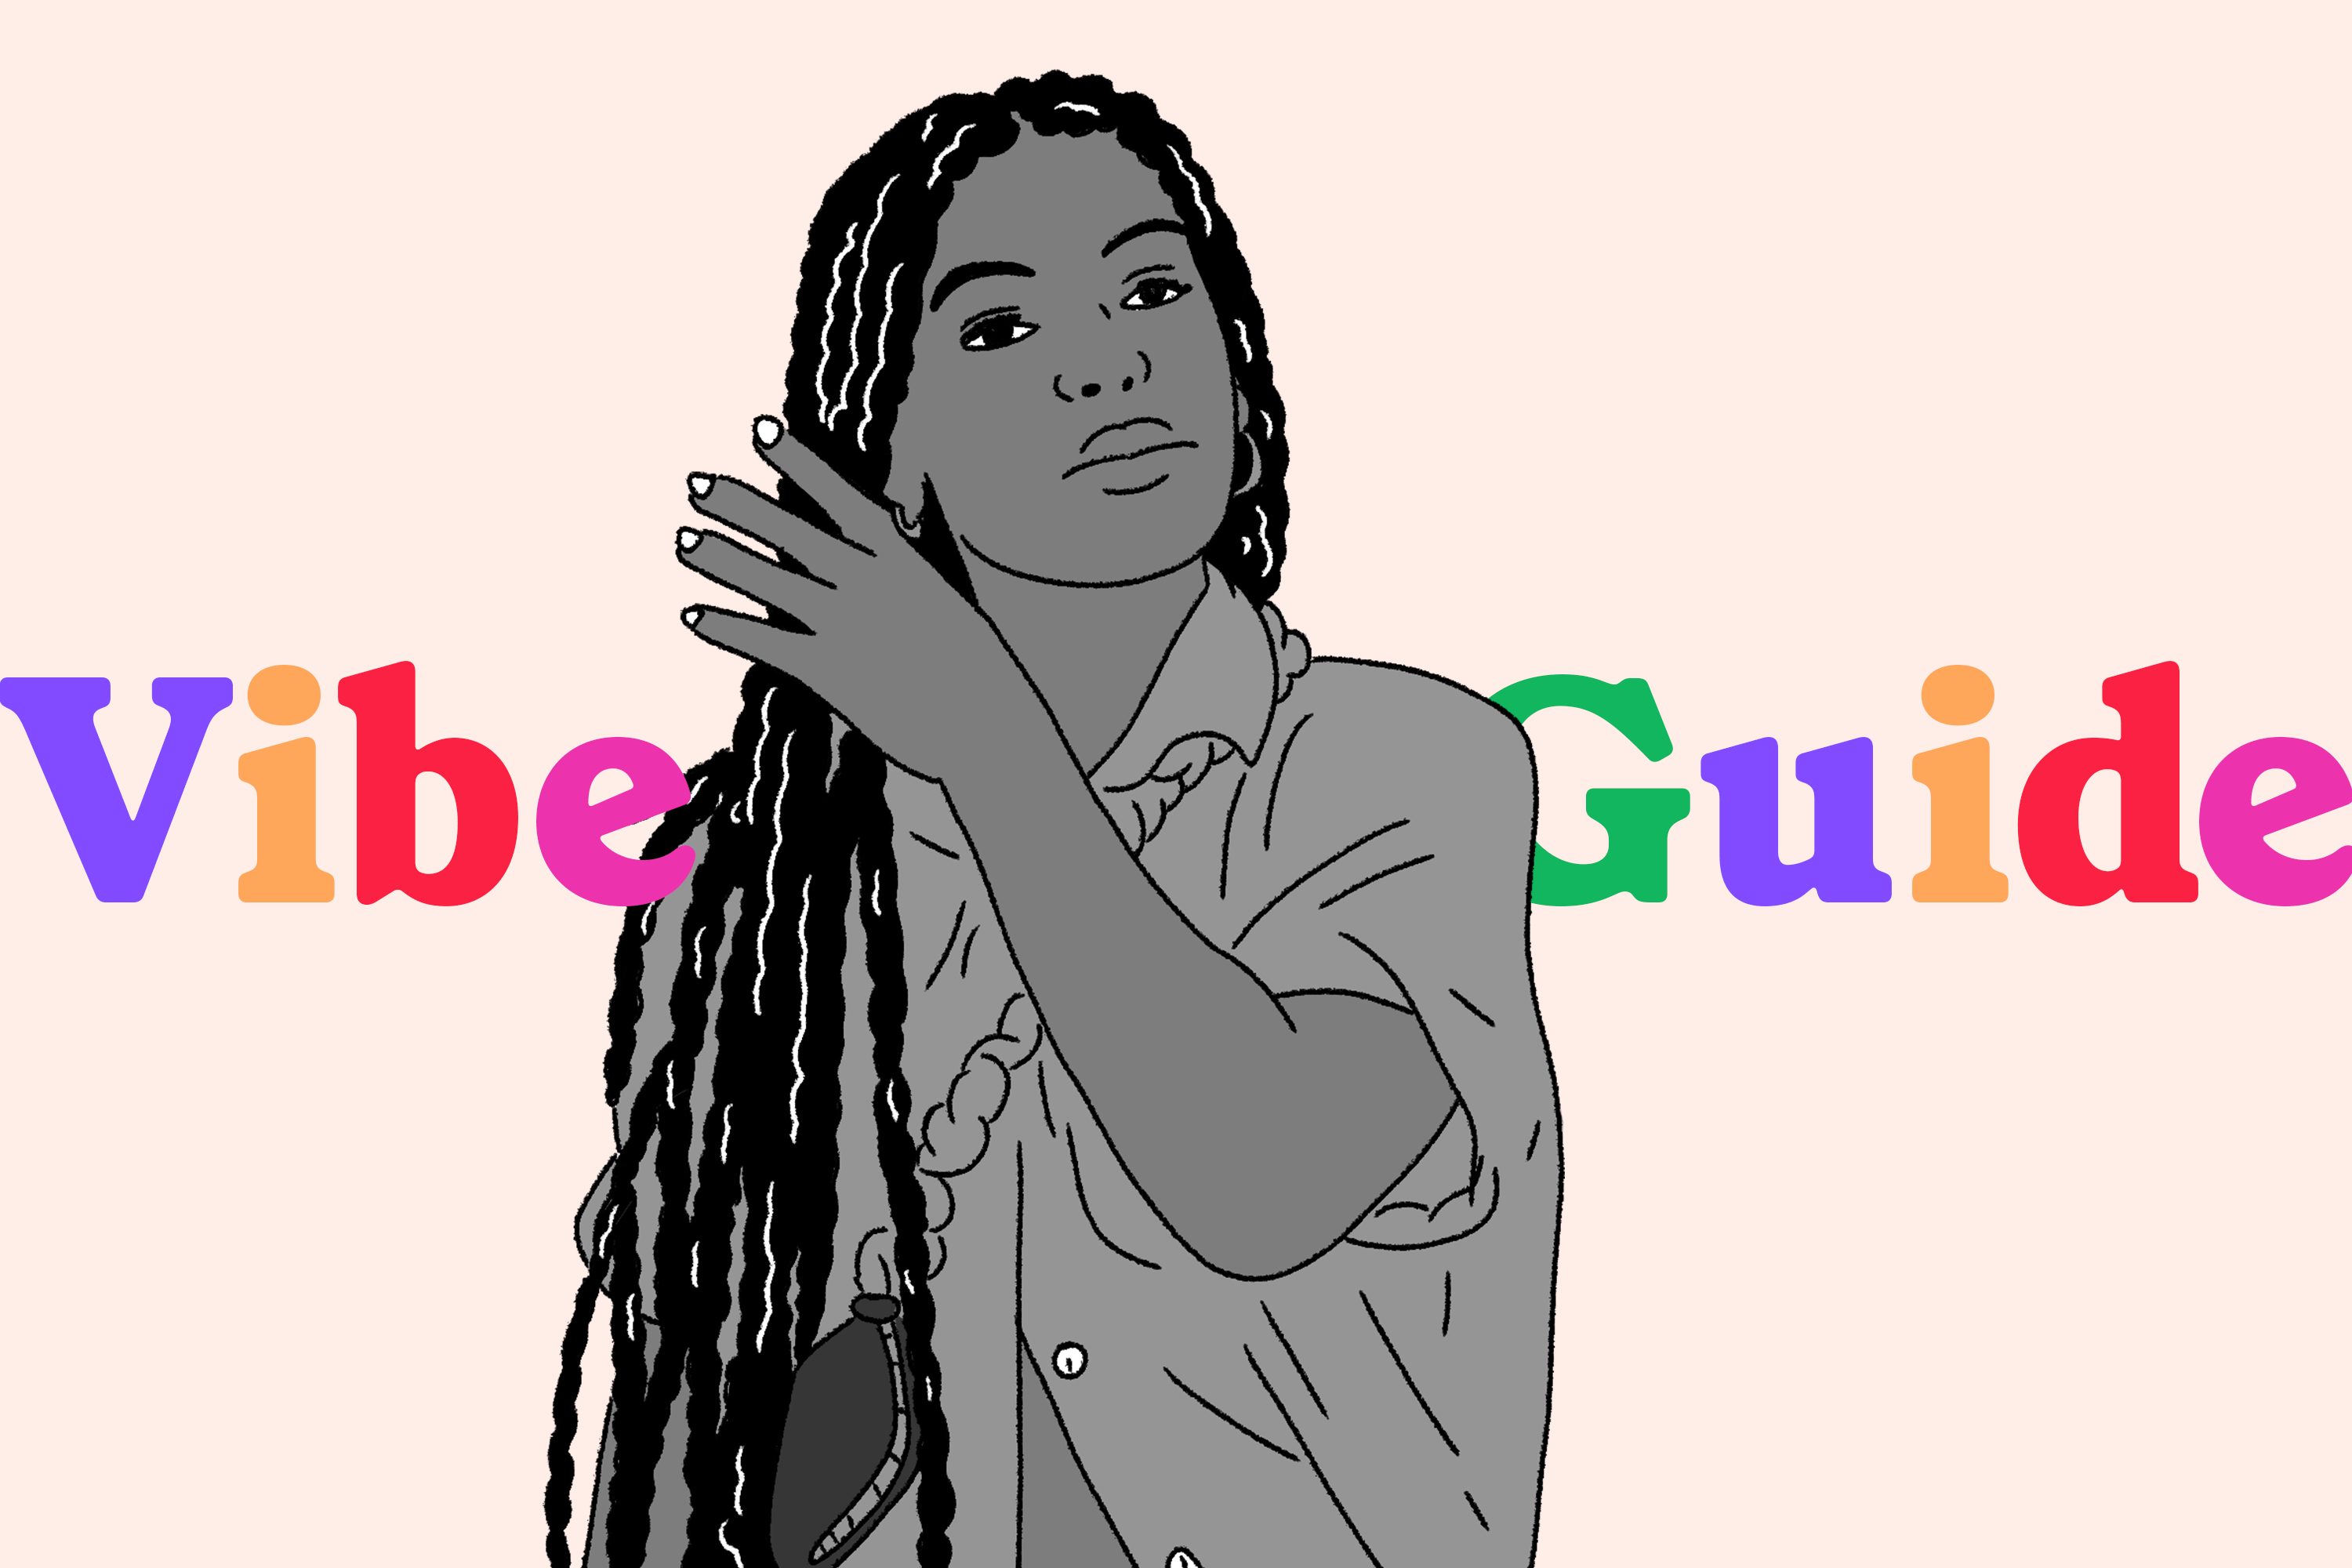 Illustration of Elsie Peterson in between the words “Vibe” and “Guide”